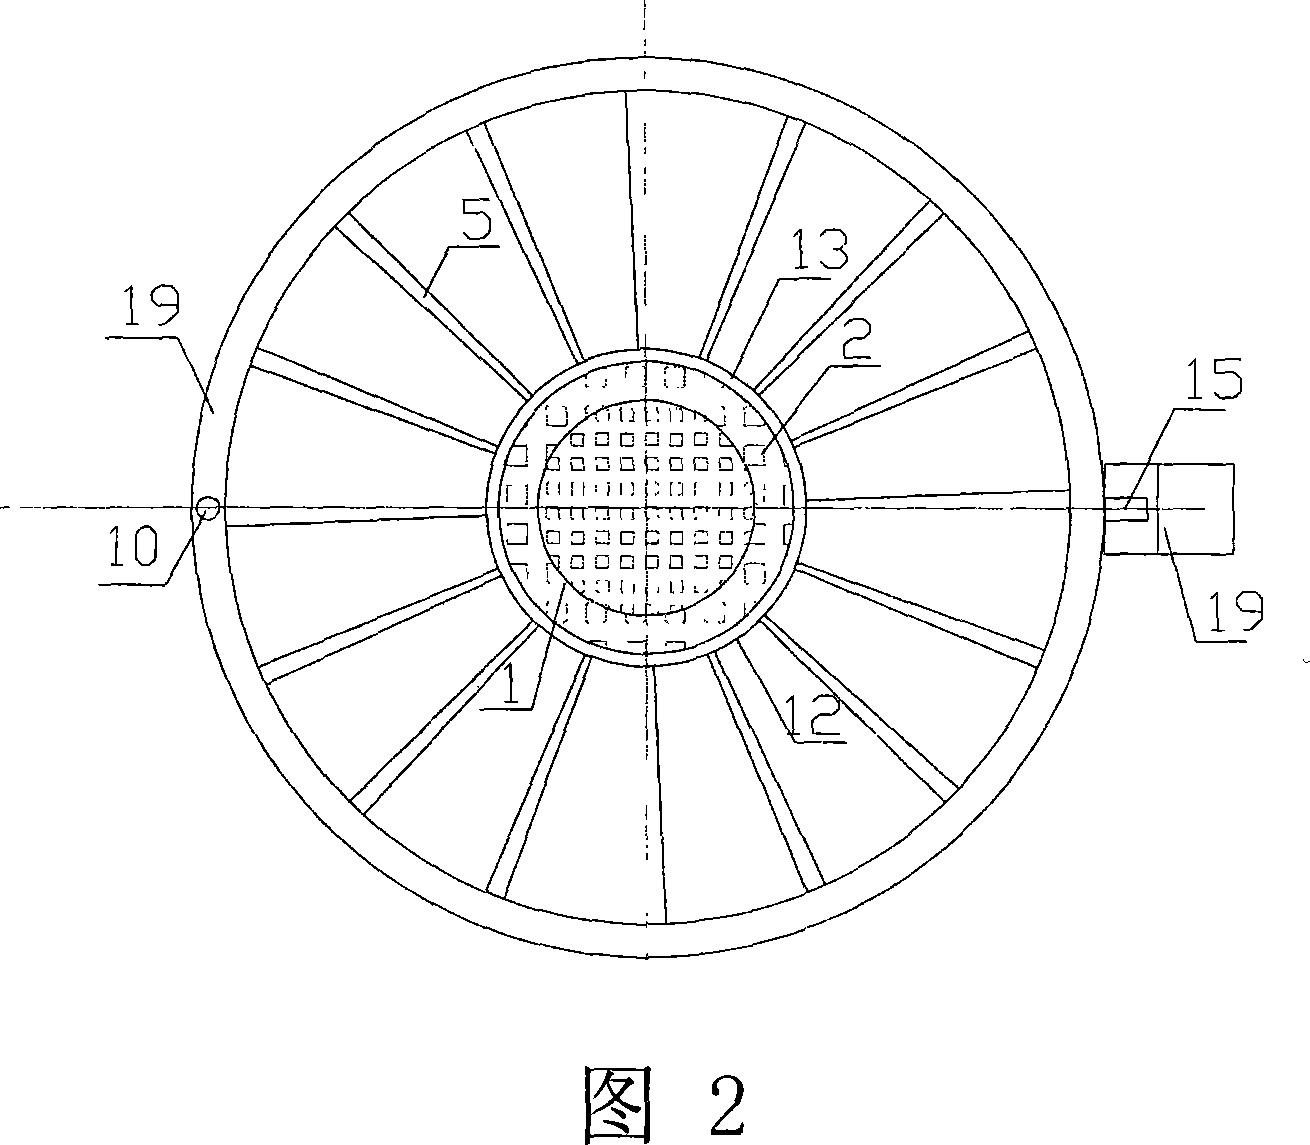 Apparatus and process for clarifying water efficiently